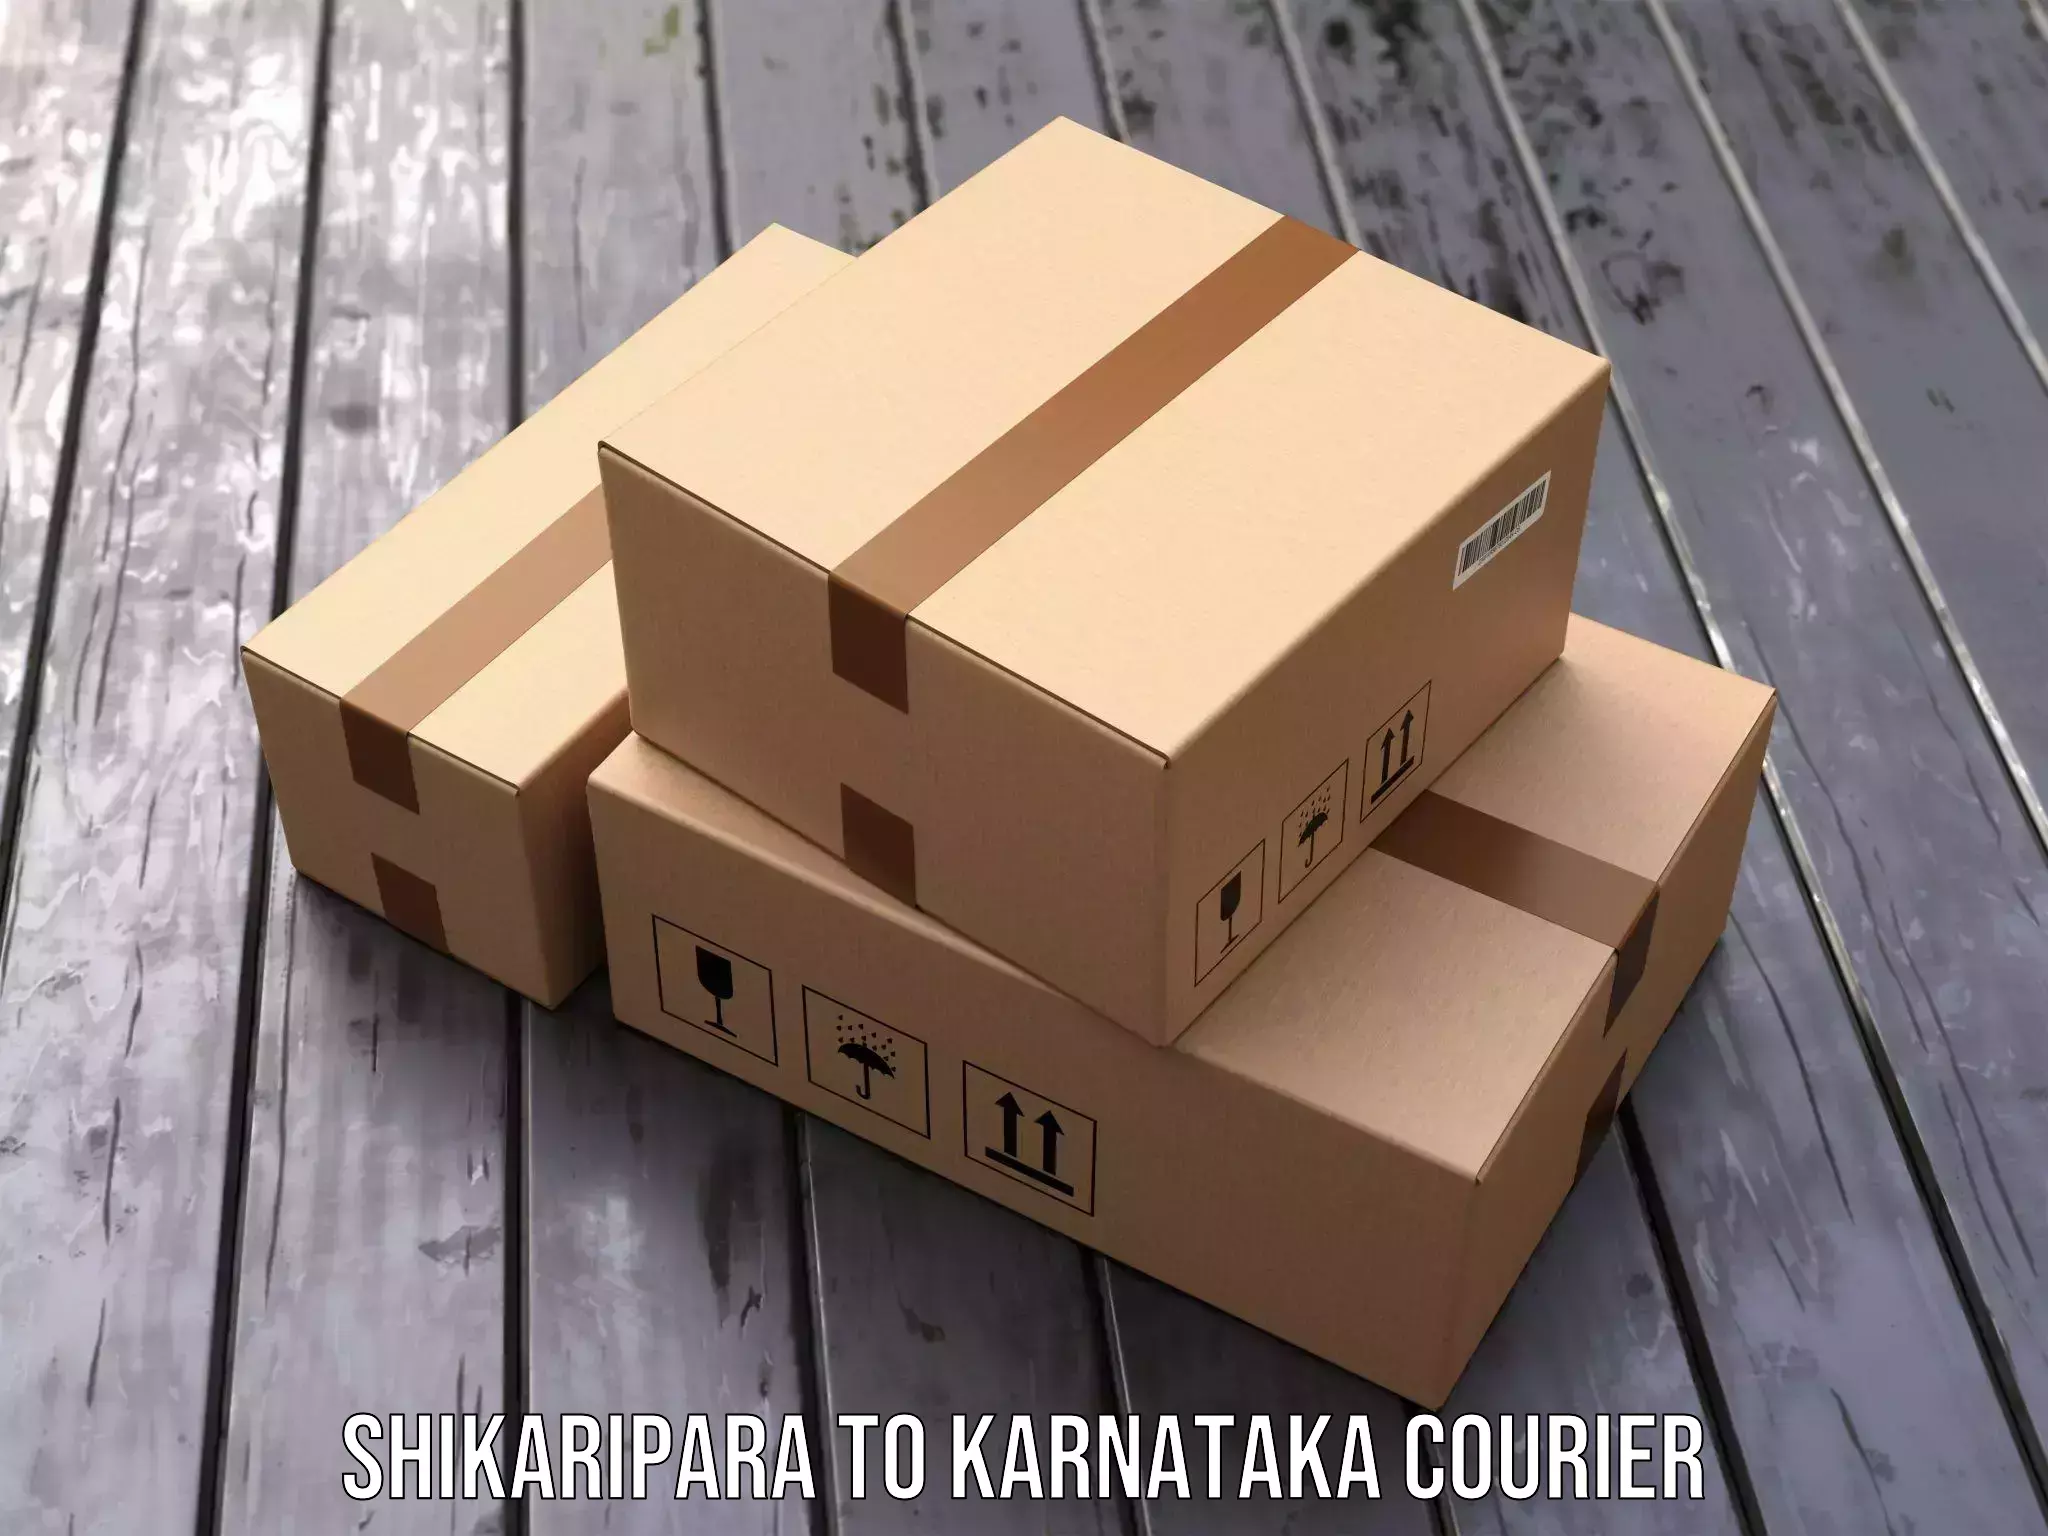 Same-day delivery solutions Shikaripara to Manipal Academy of Higher Education